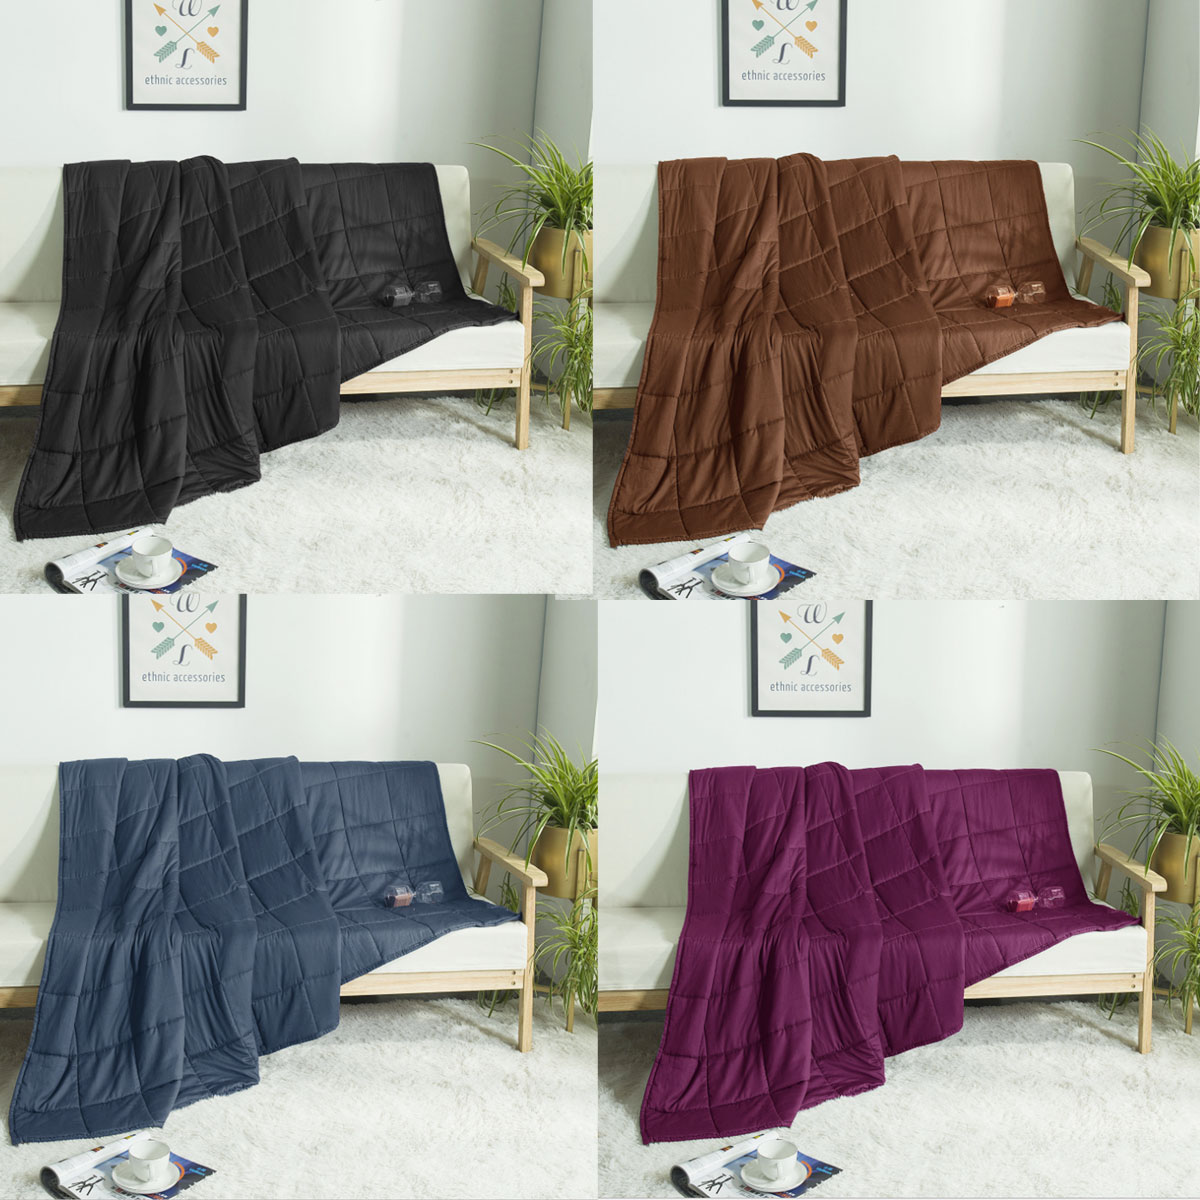 Weighted Blanket for Adult Children Blankets Decompression Sleep Aid Pressure Weighted Quilt Soft Heavy Blanket for Bed Sofa